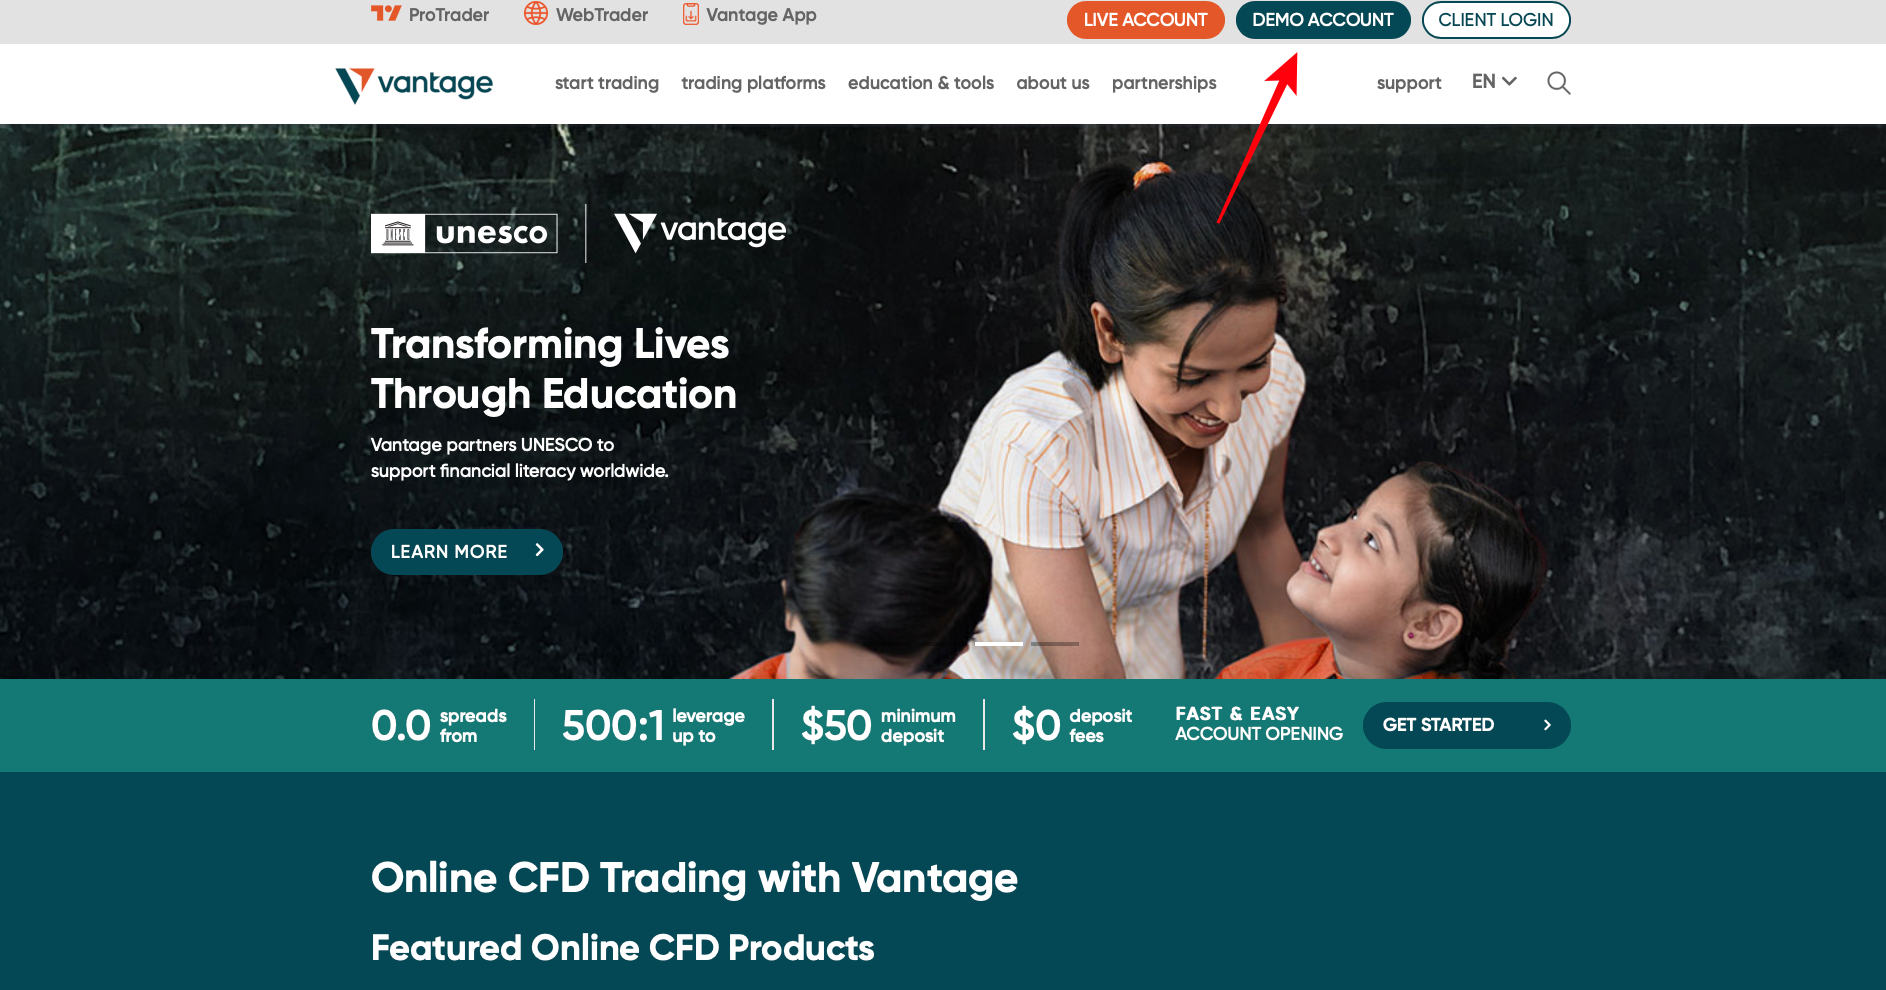 How to sign up for a MetaTrader 4 demo account on Vantage Markets